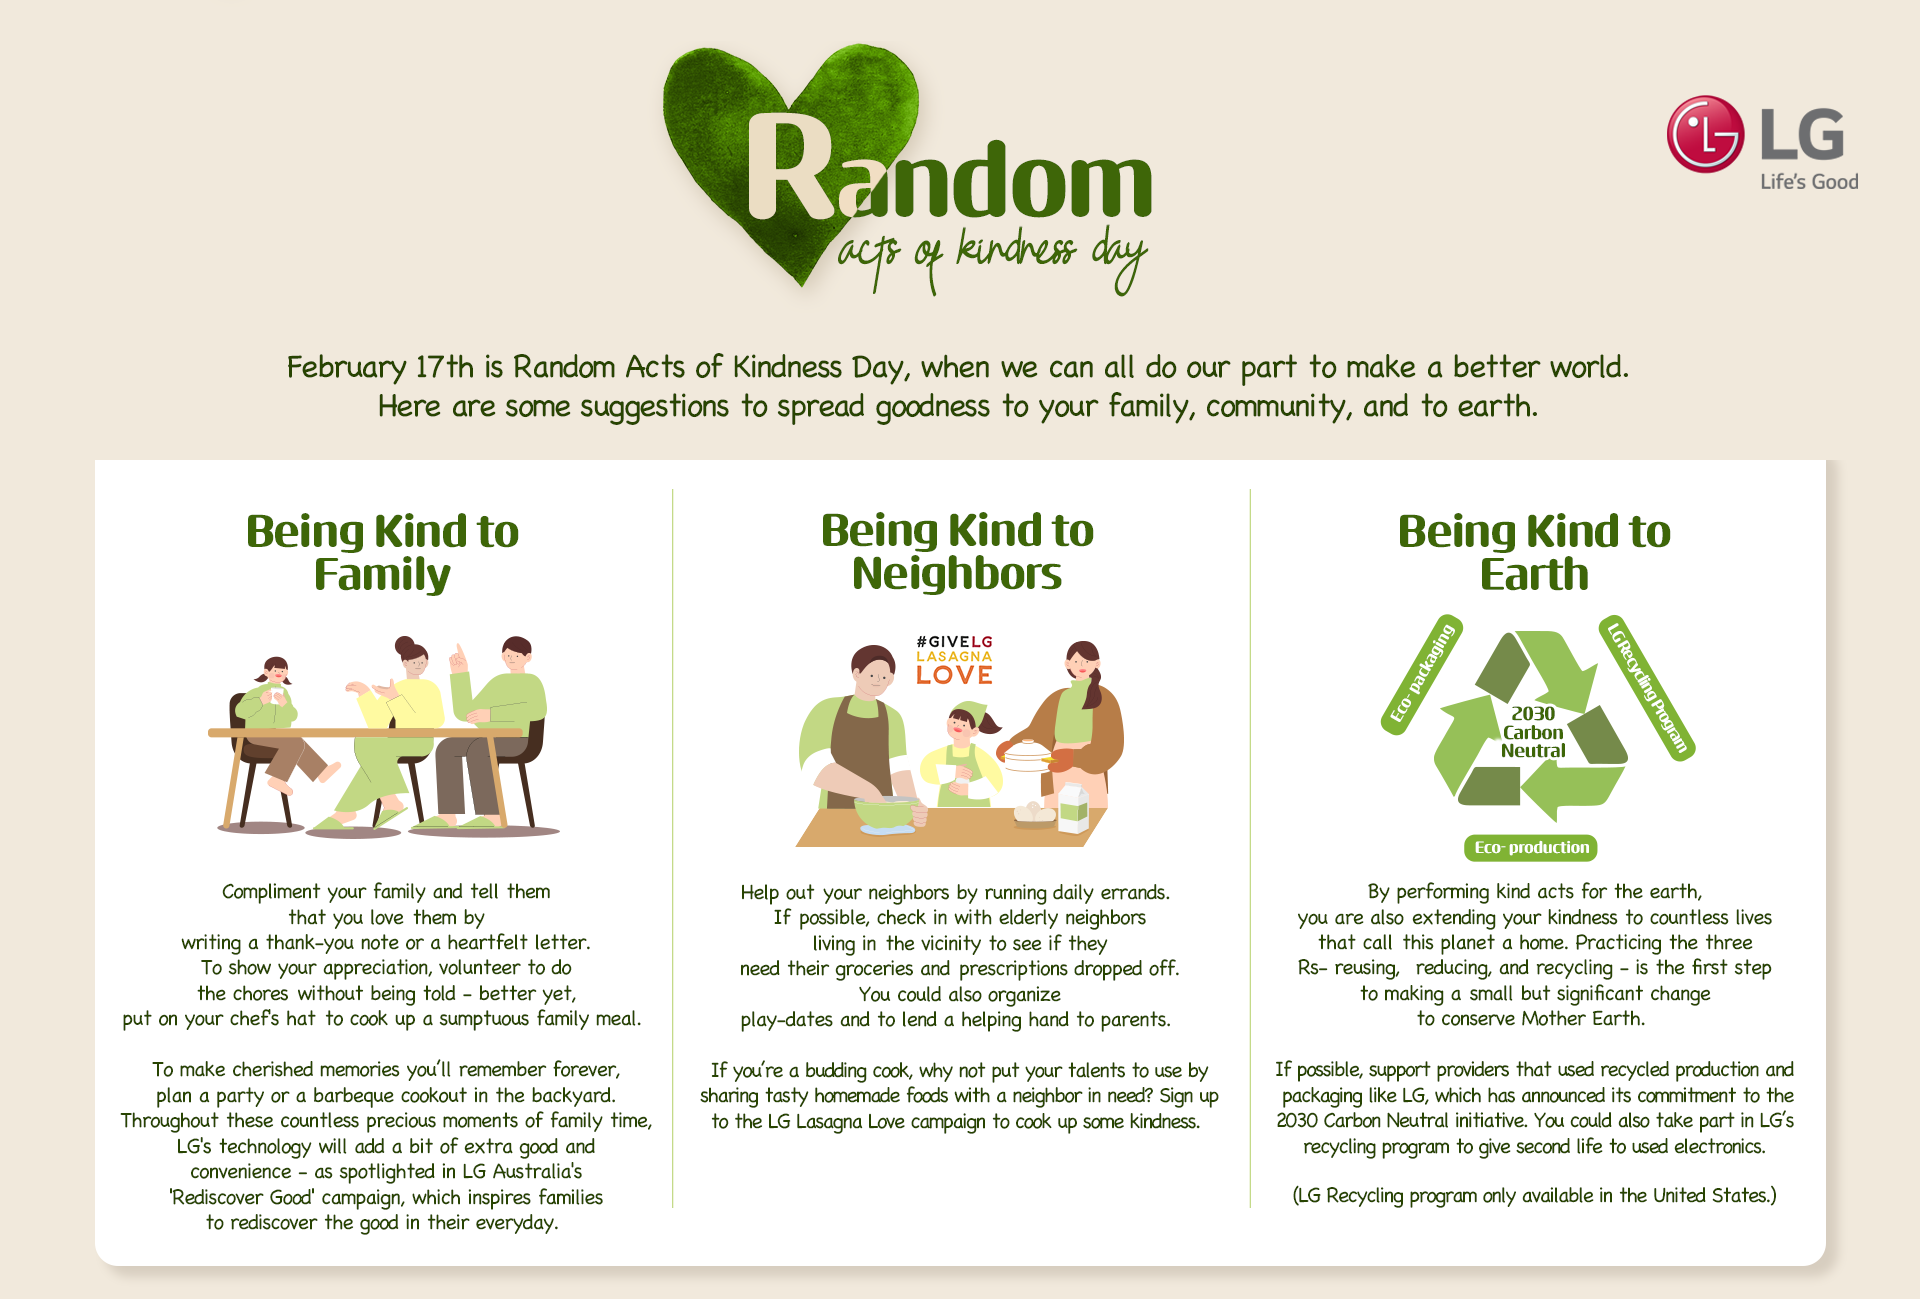 Random Acts of Kindness Day with LG